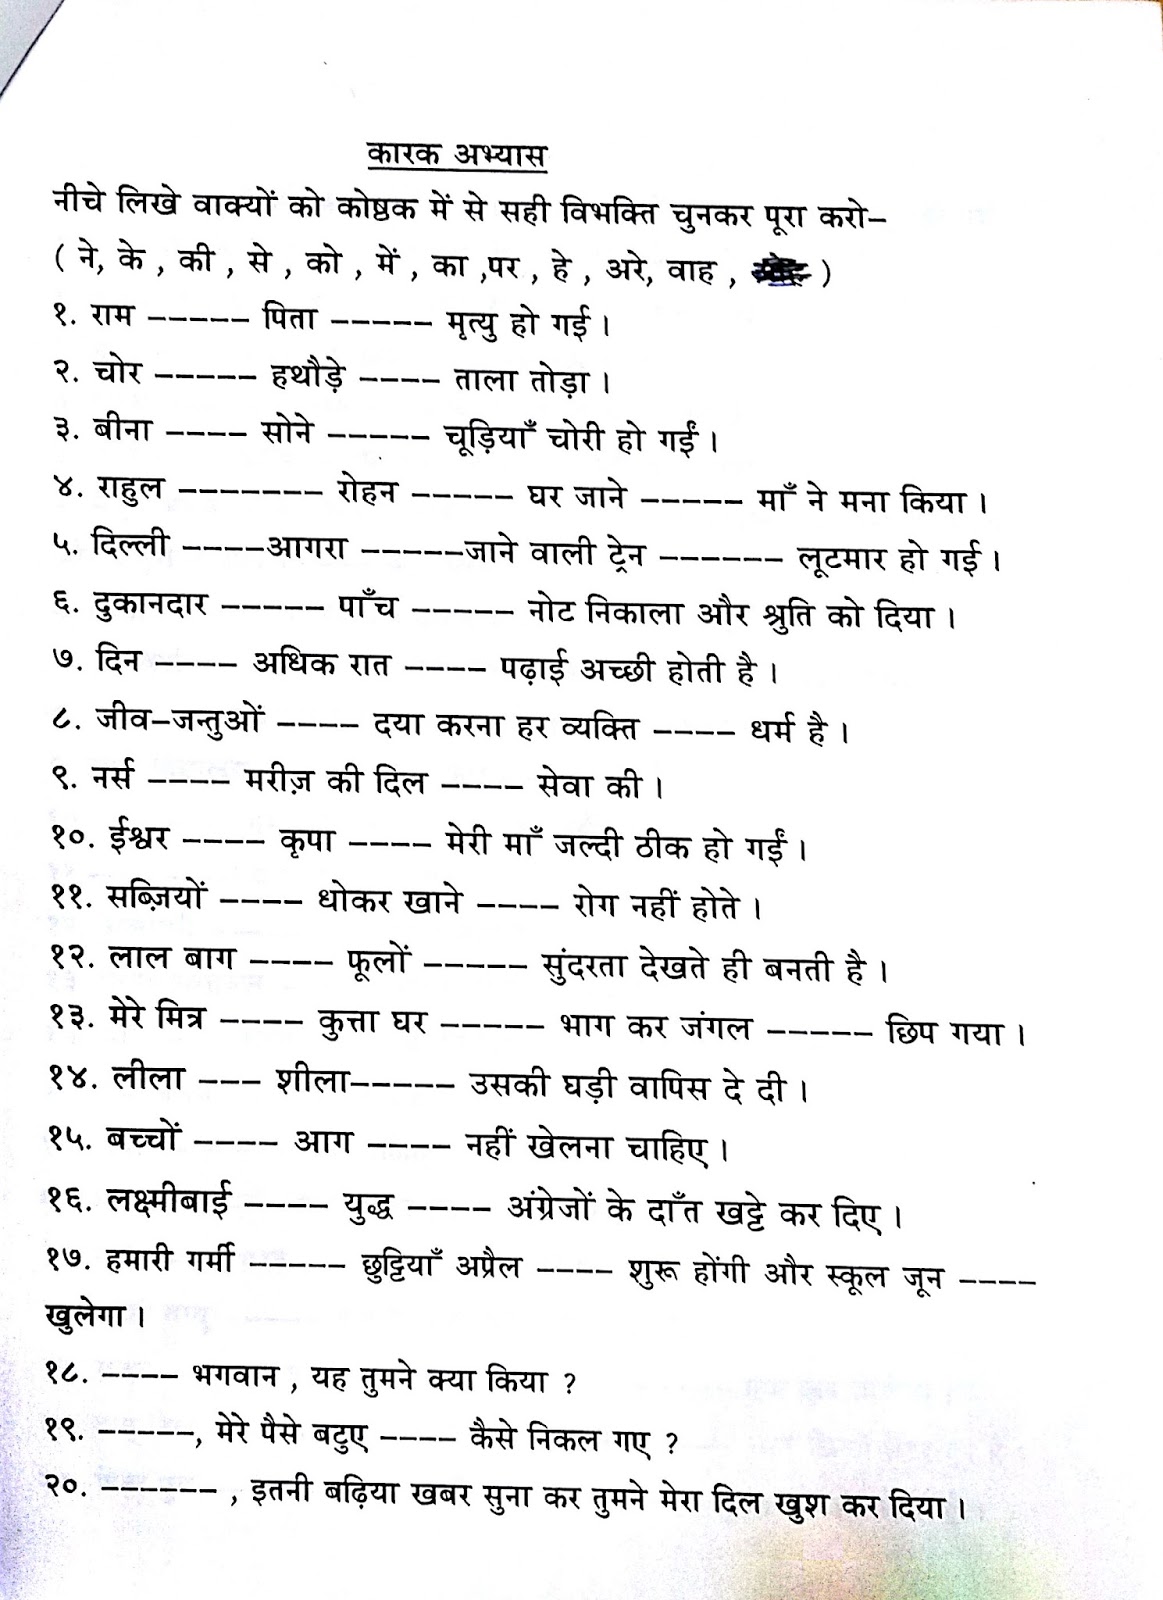 Hindi Grammar Work Sheet Collection For Classes 5 6 7 8 Cases Or Karak Work Sheets For